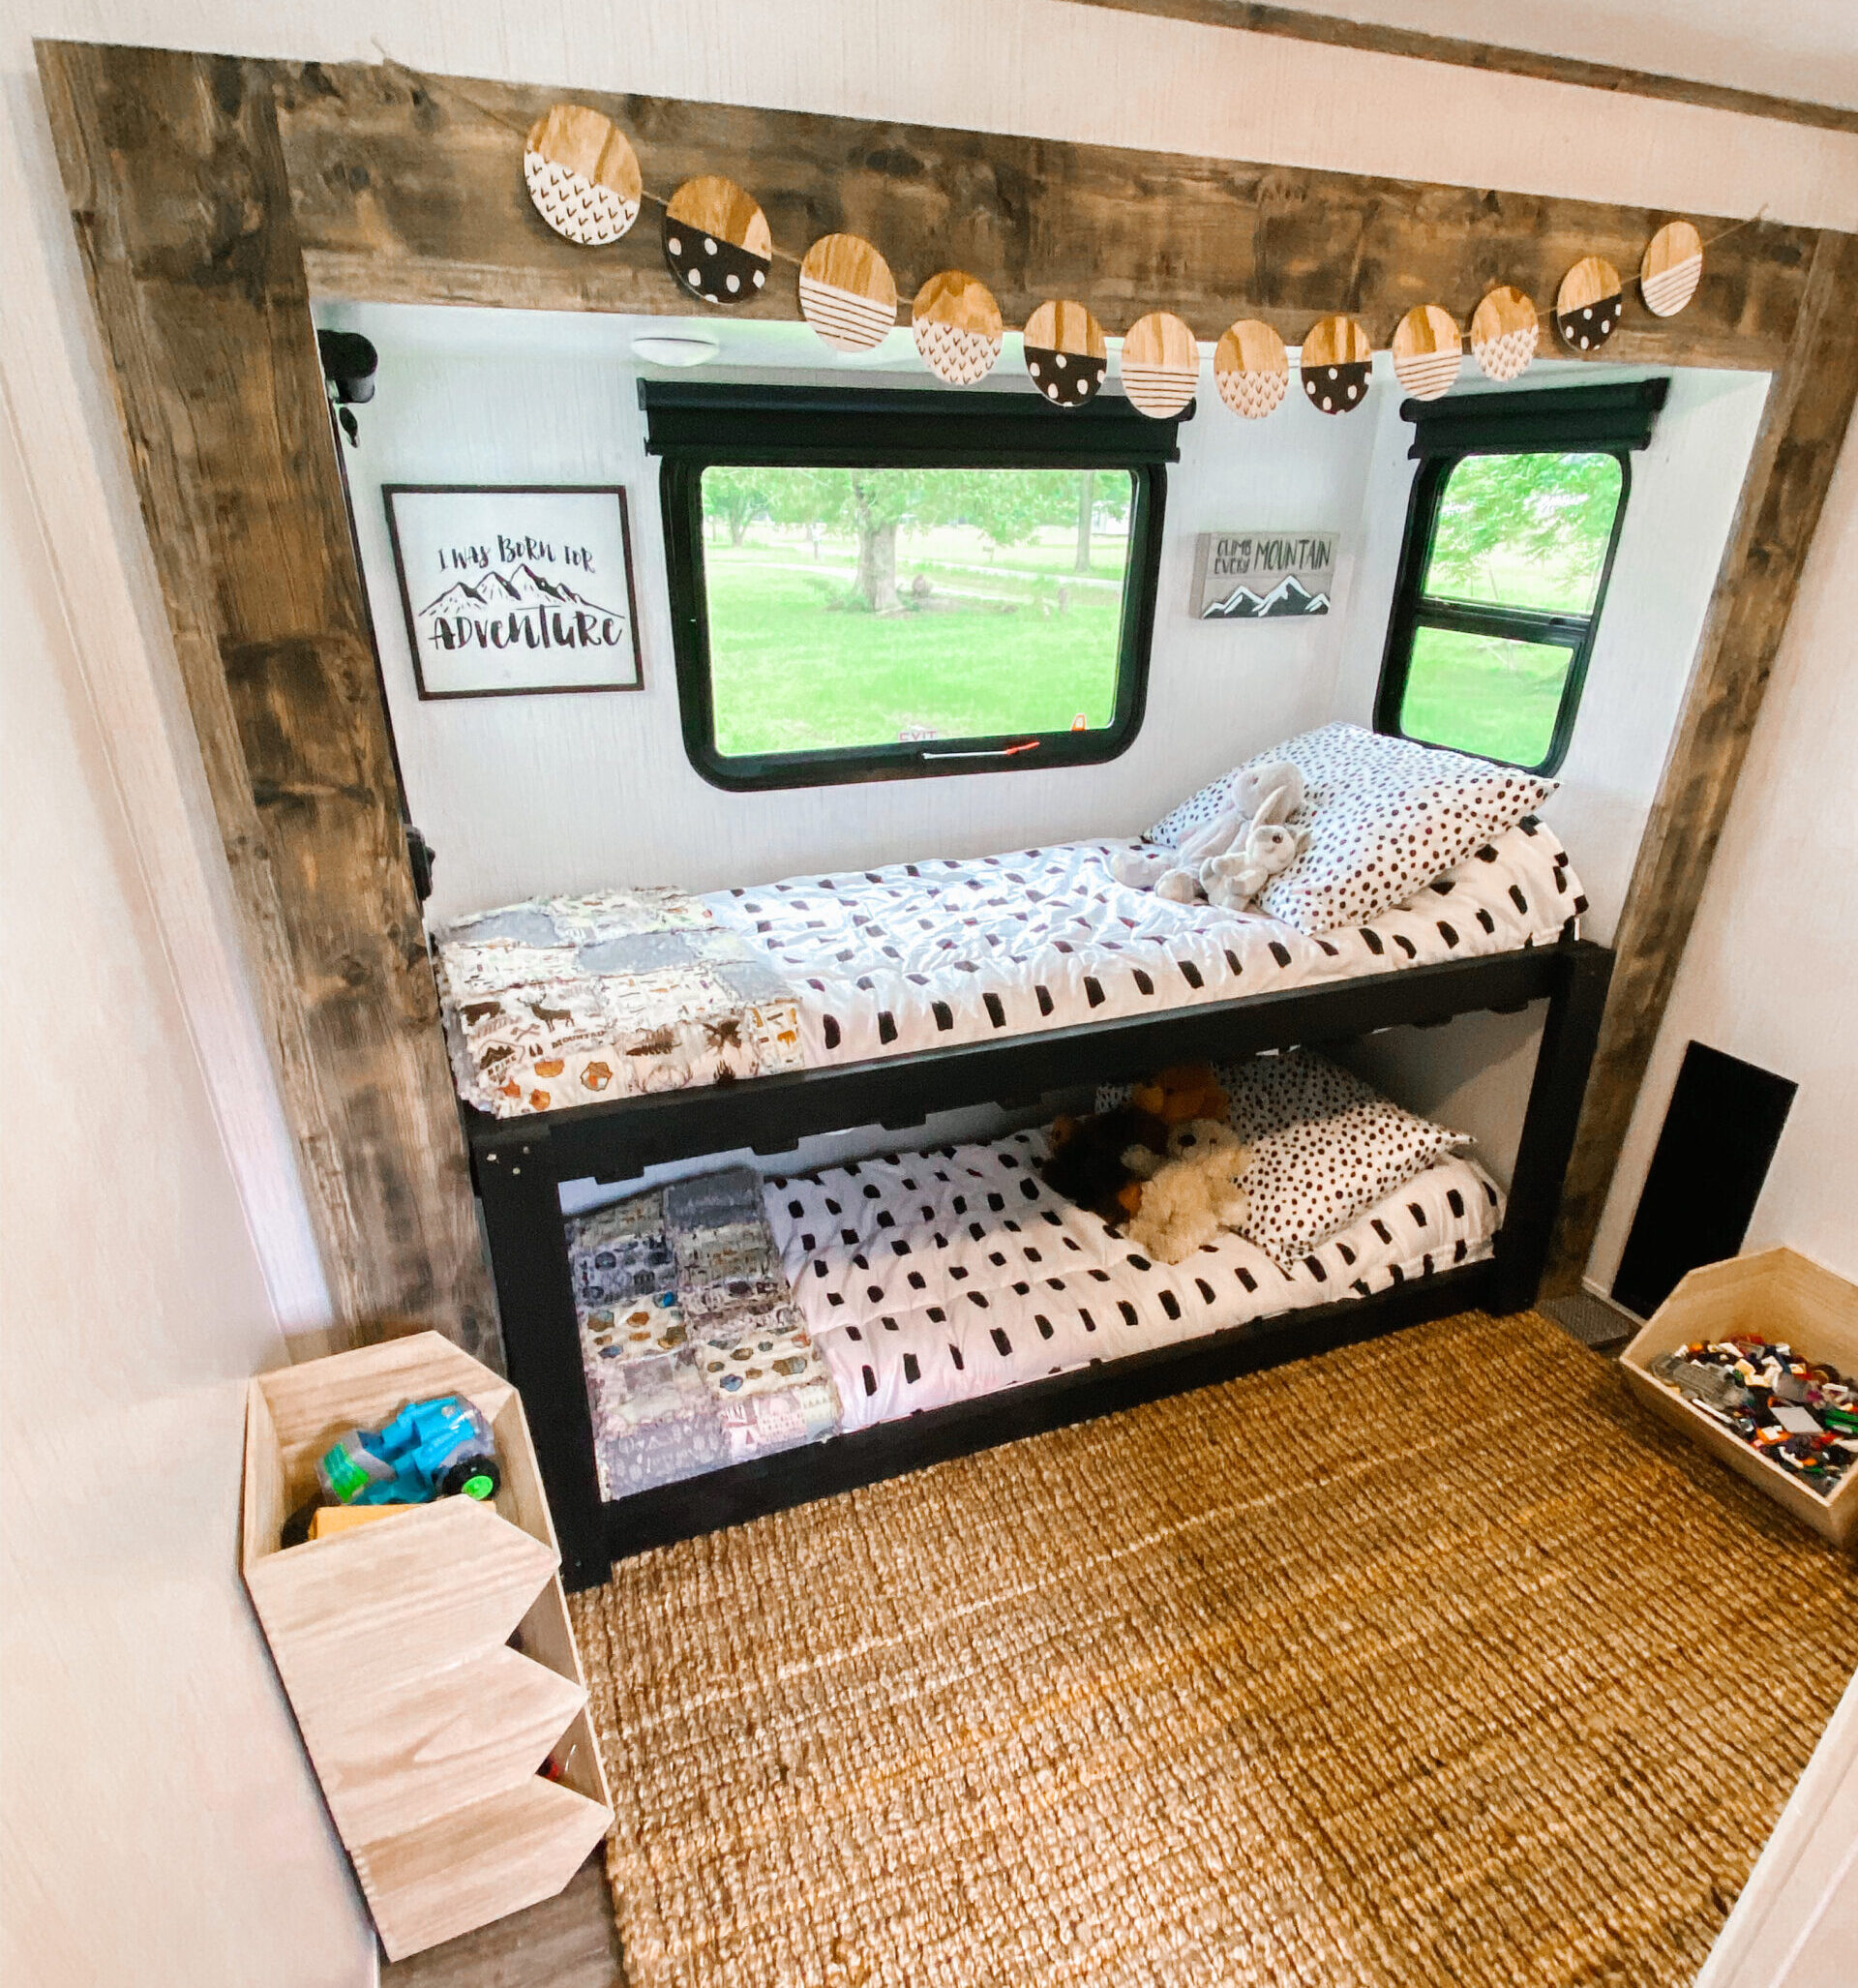 Make your RV work for you by doubling up on sleep space.